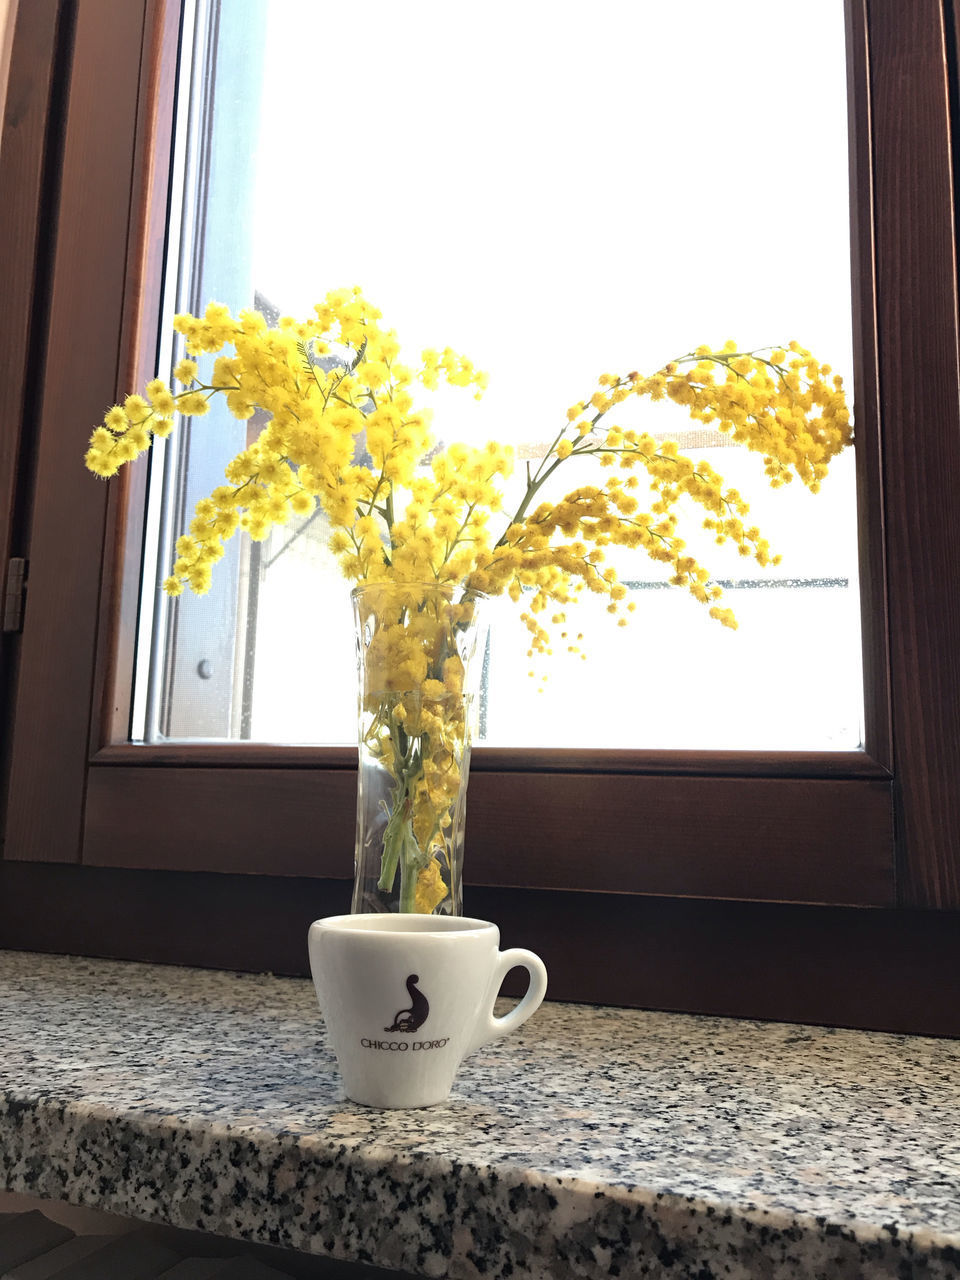 CLOSE-UP OF YELLOW FLOWER VASE ON TABLE